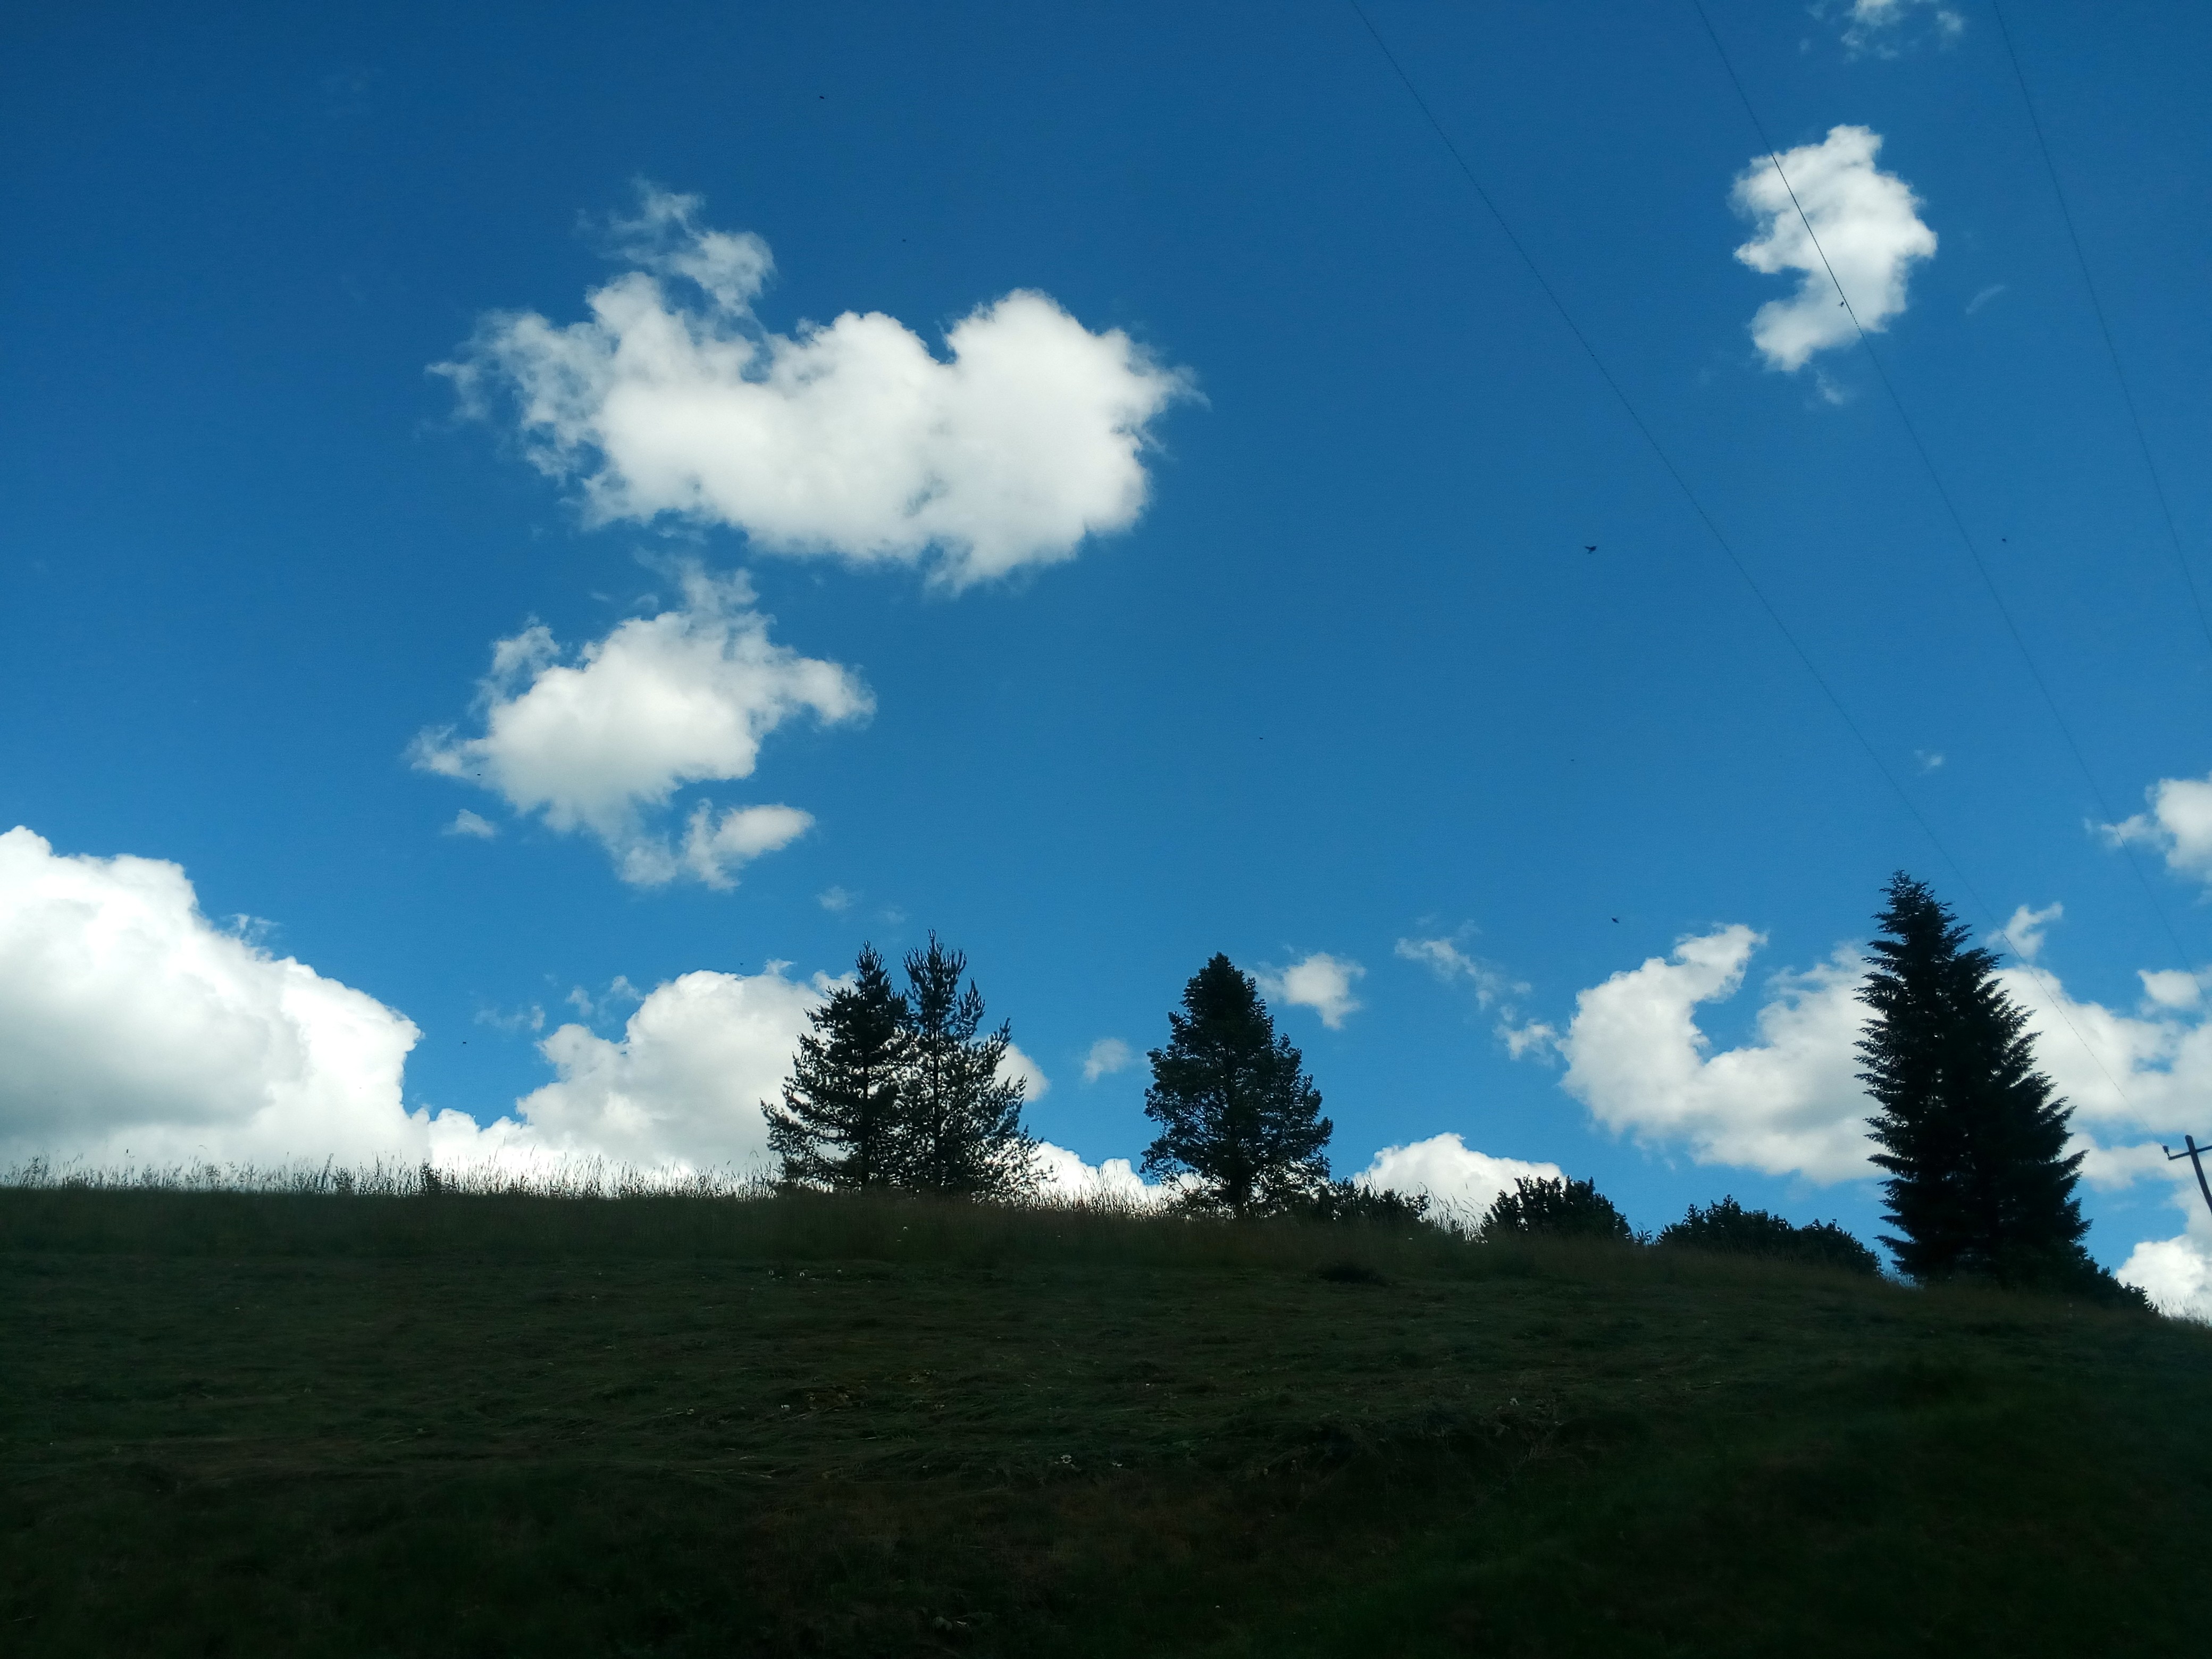 General 4160x3120 sky nature Serbia June trees outdoors clouds